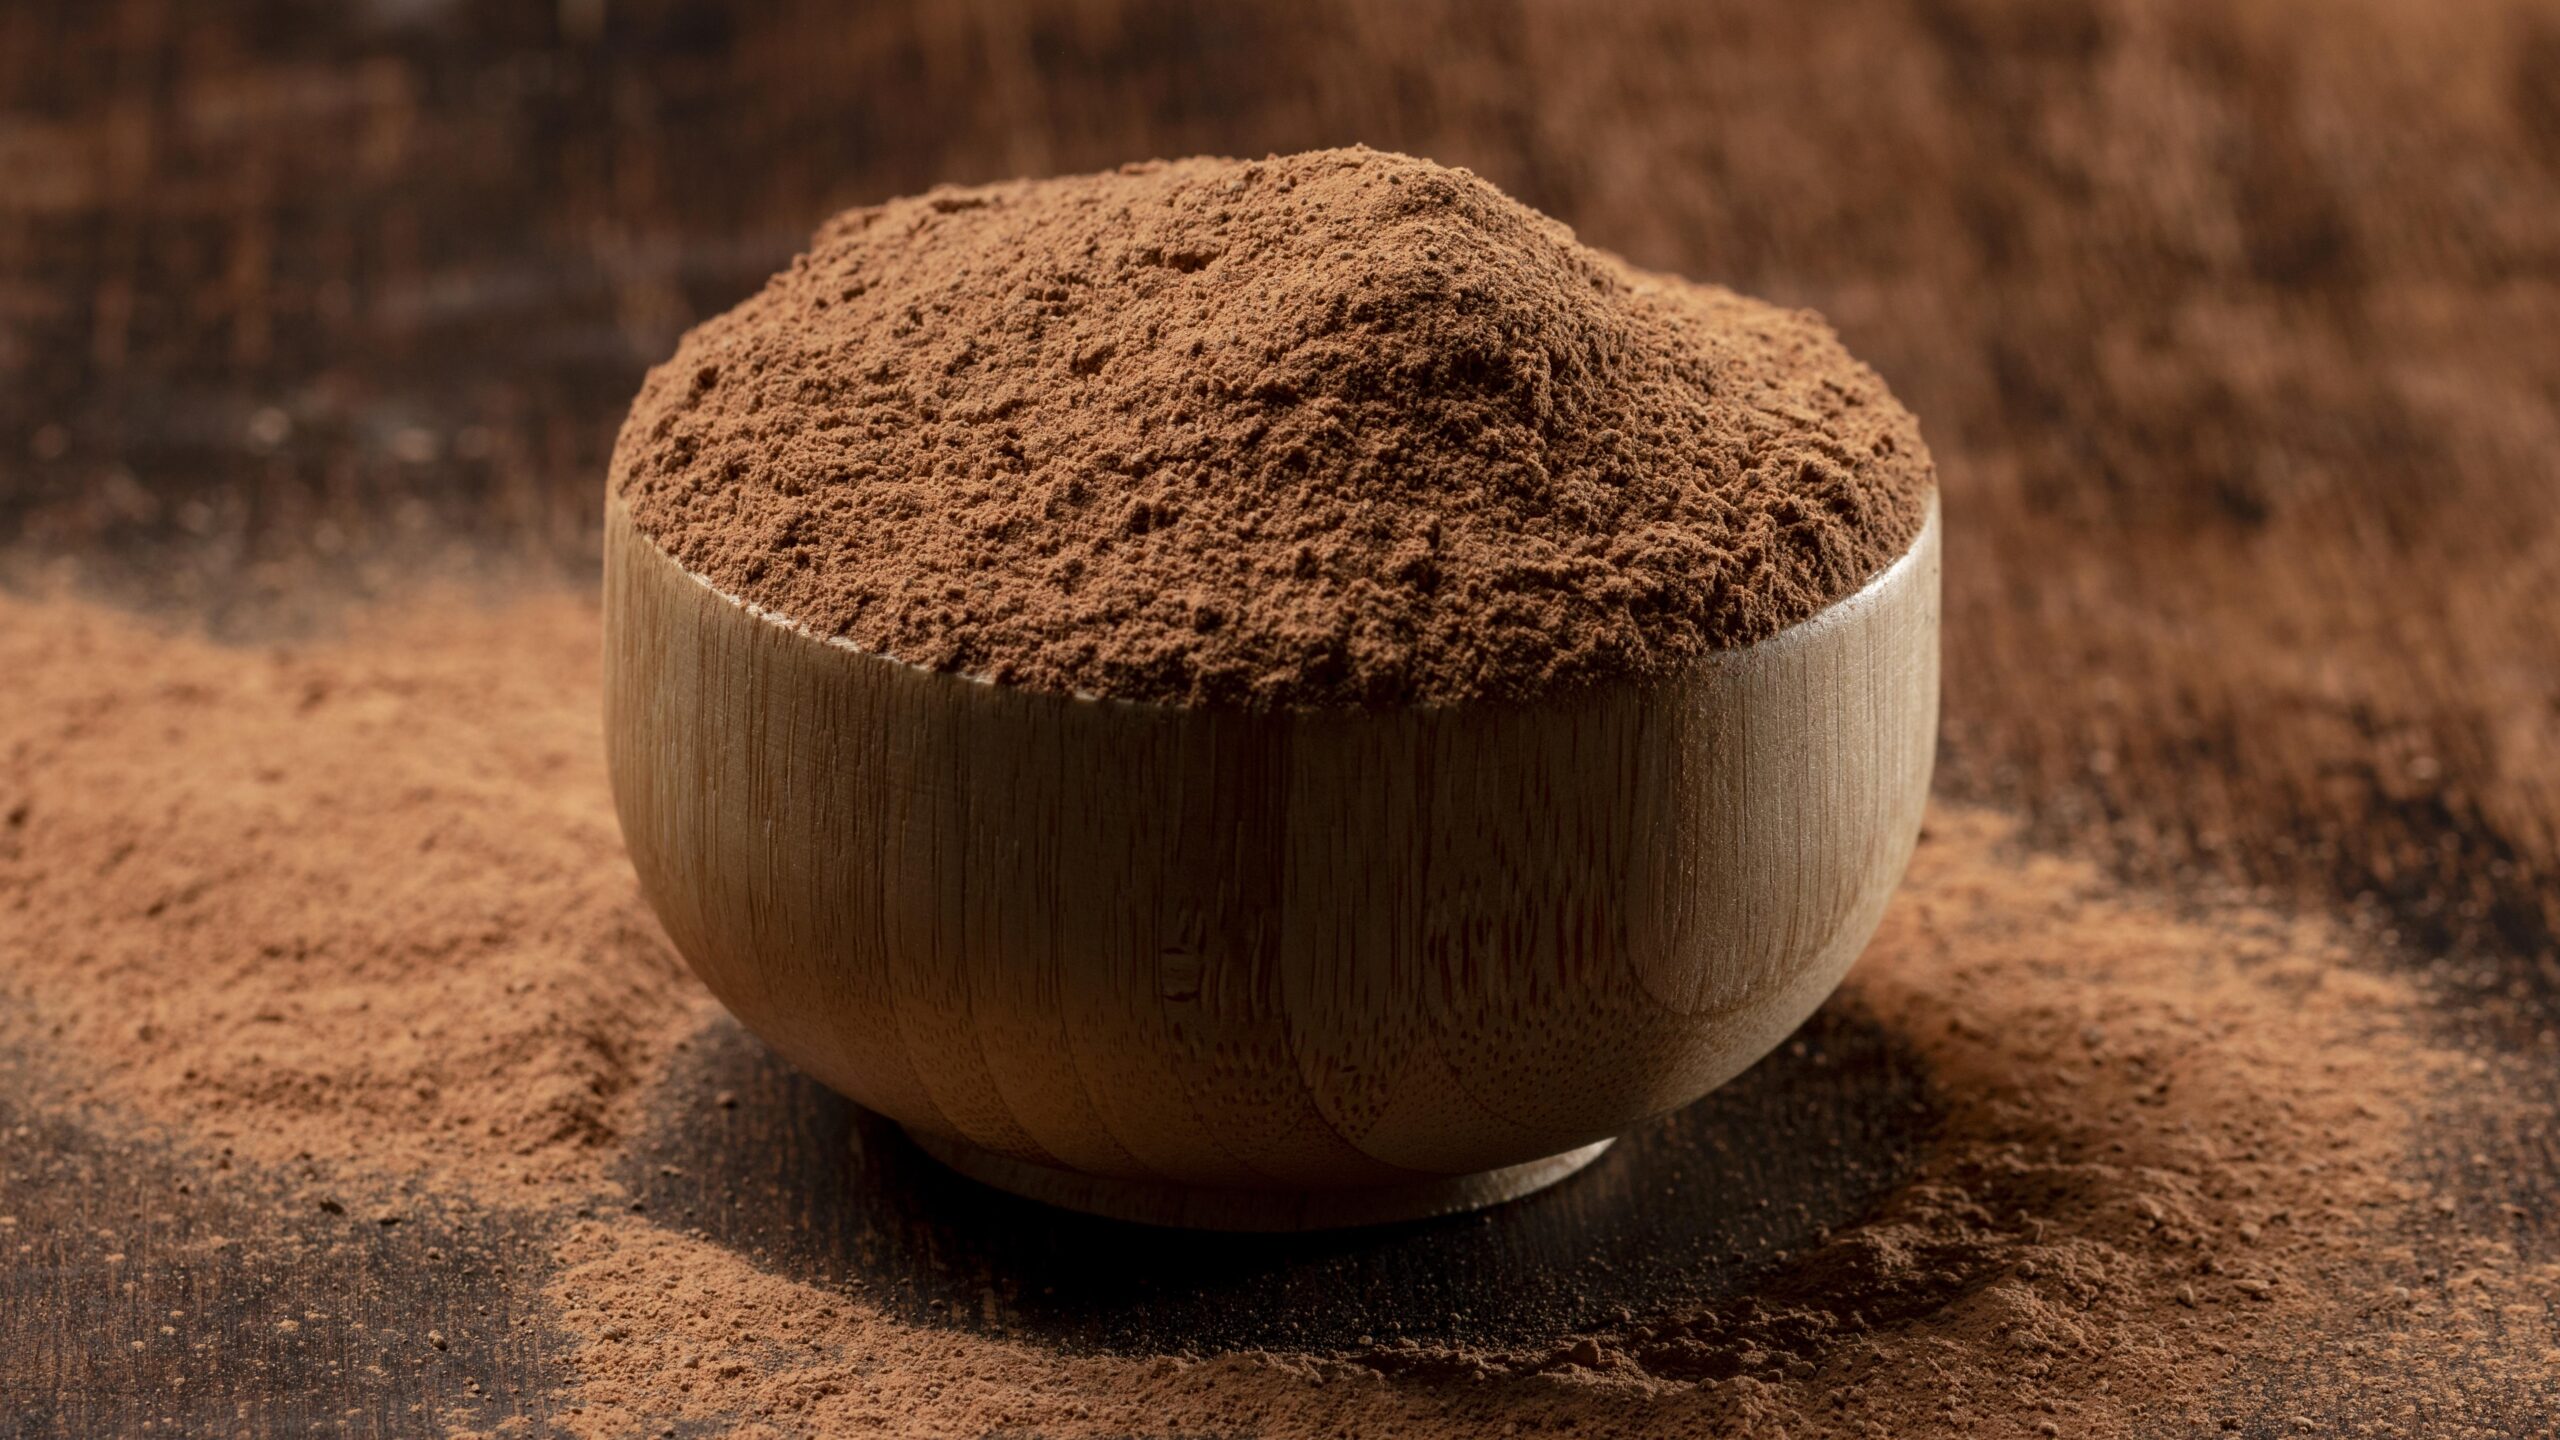 Cocoa Powder: A Delicious Superfood for Weight Loss